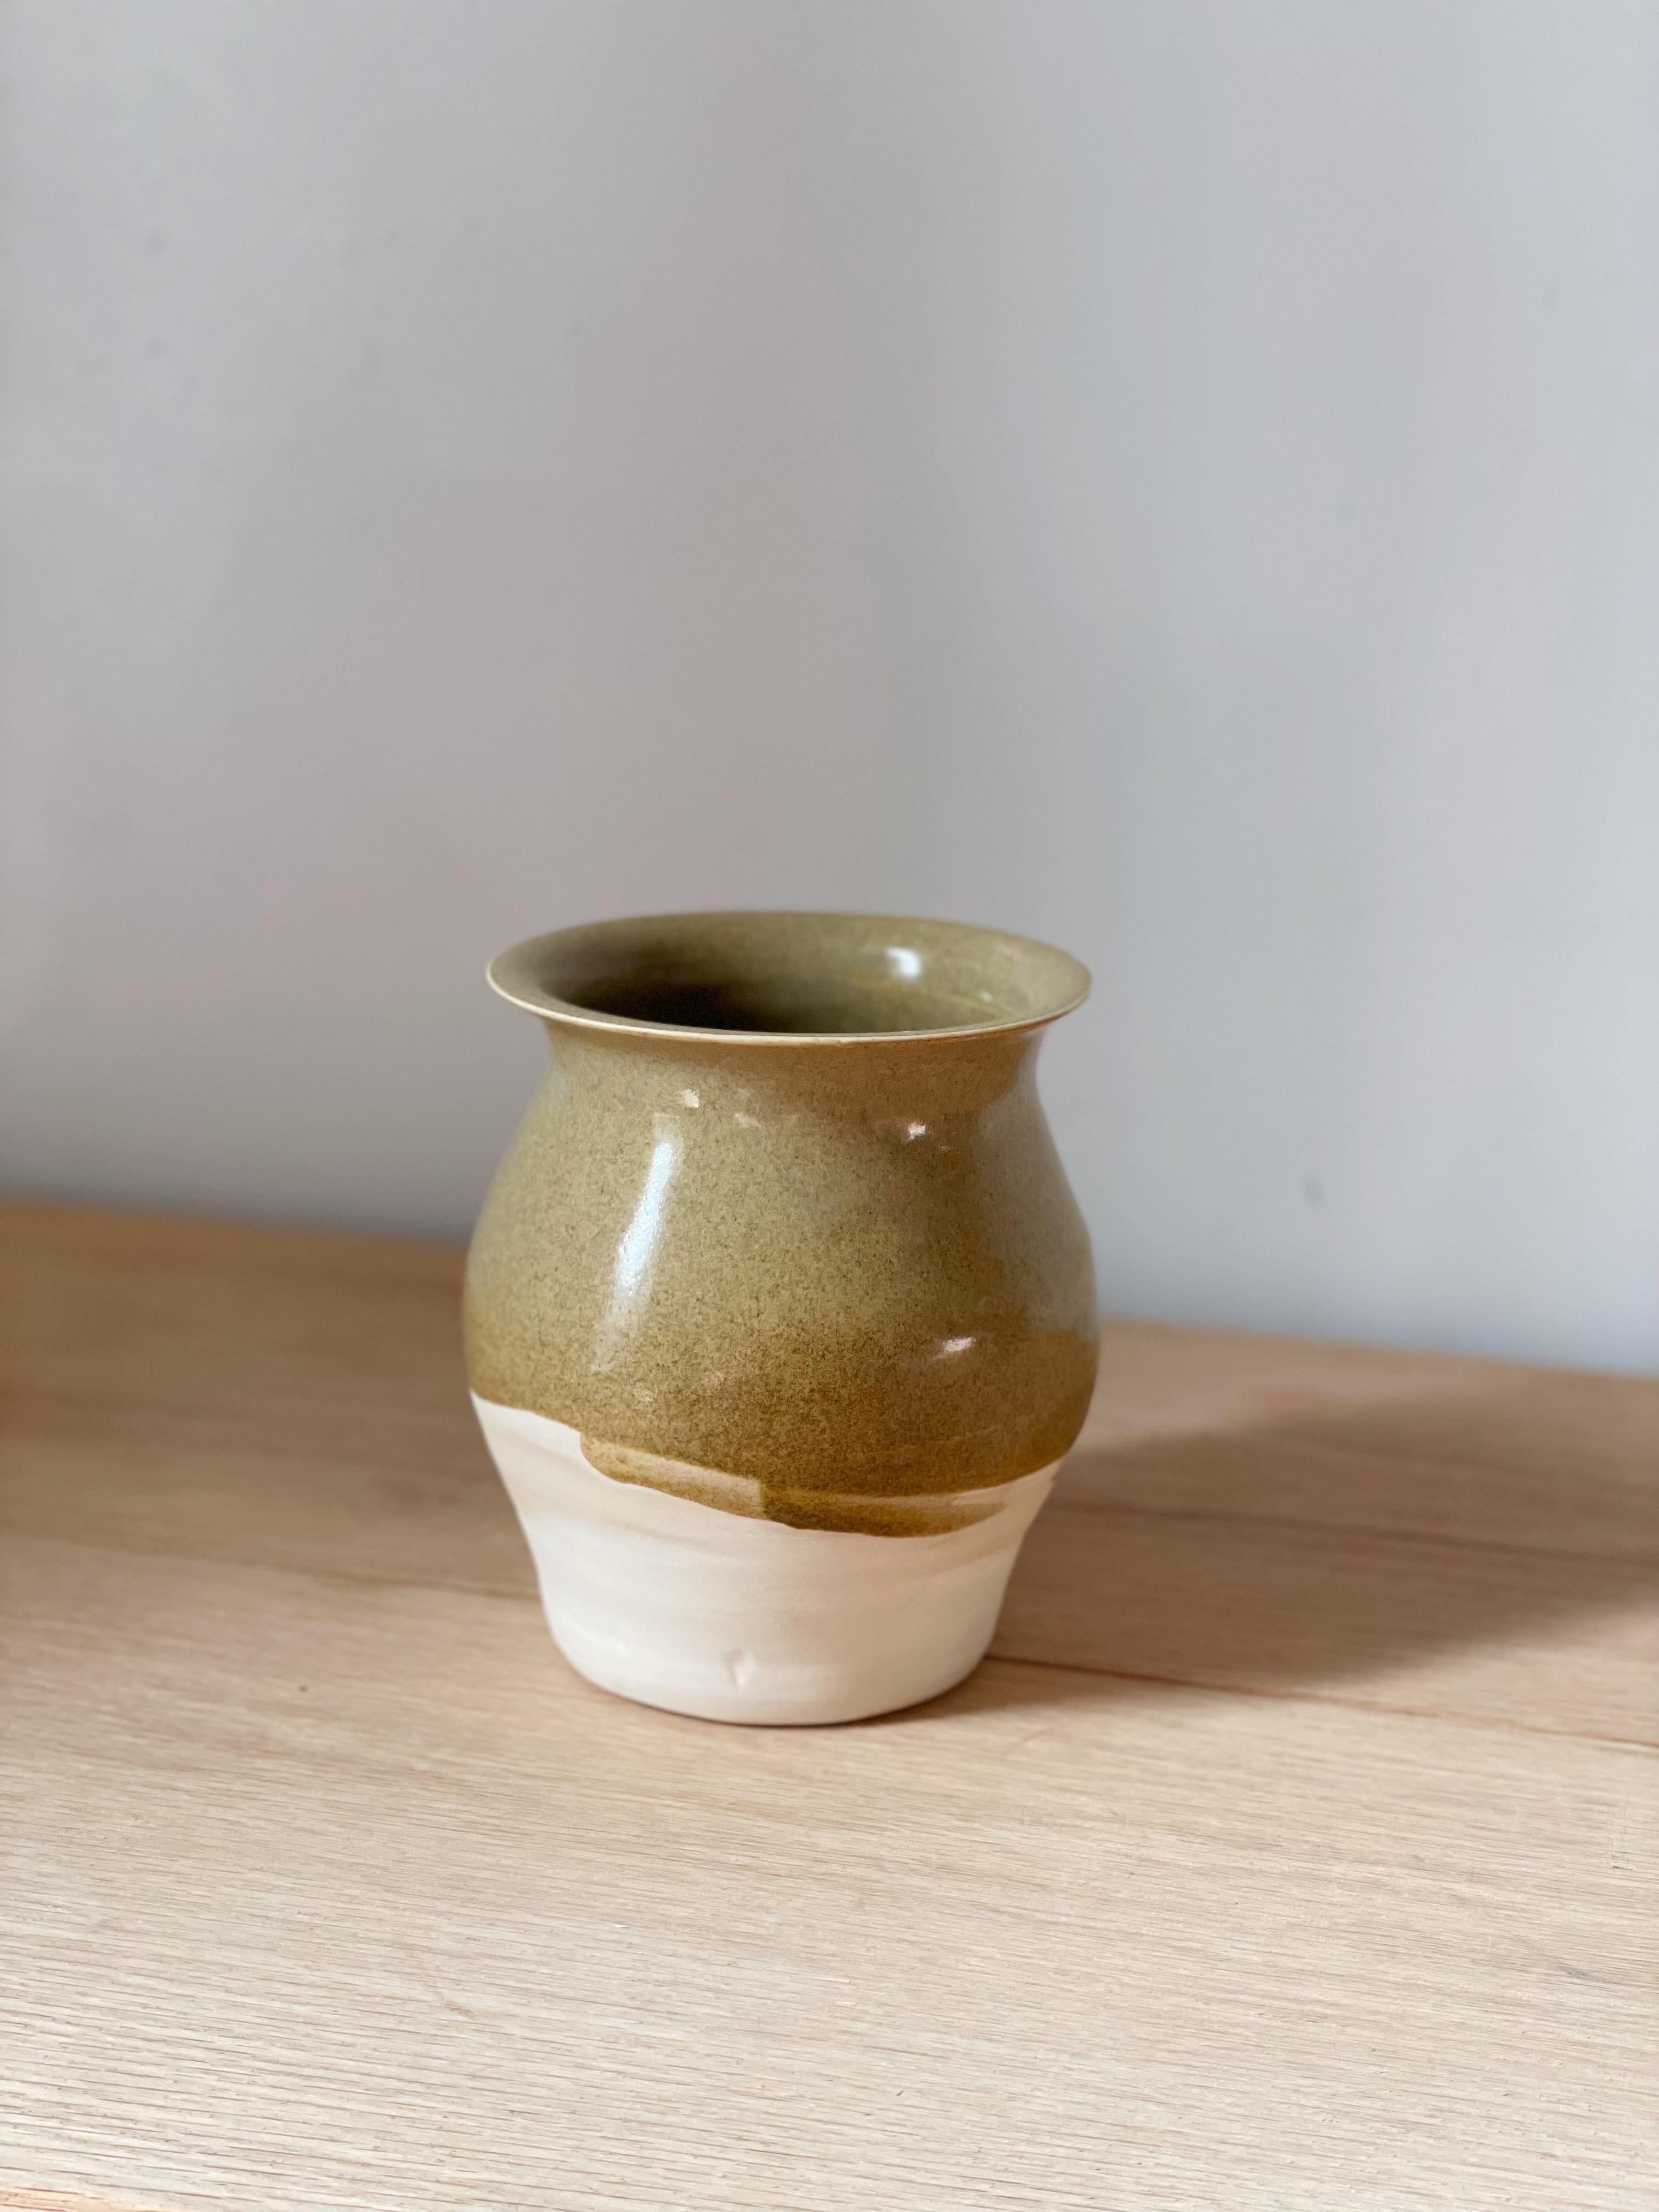 mustard vessel - A wheel thrown vase, with a bulbous body, and a flare at the lip. This piece is made with white stoneware and paired with a delicious mustard glaze, that has a slight texture to it. The glaze has a warm tone overall, and covers most